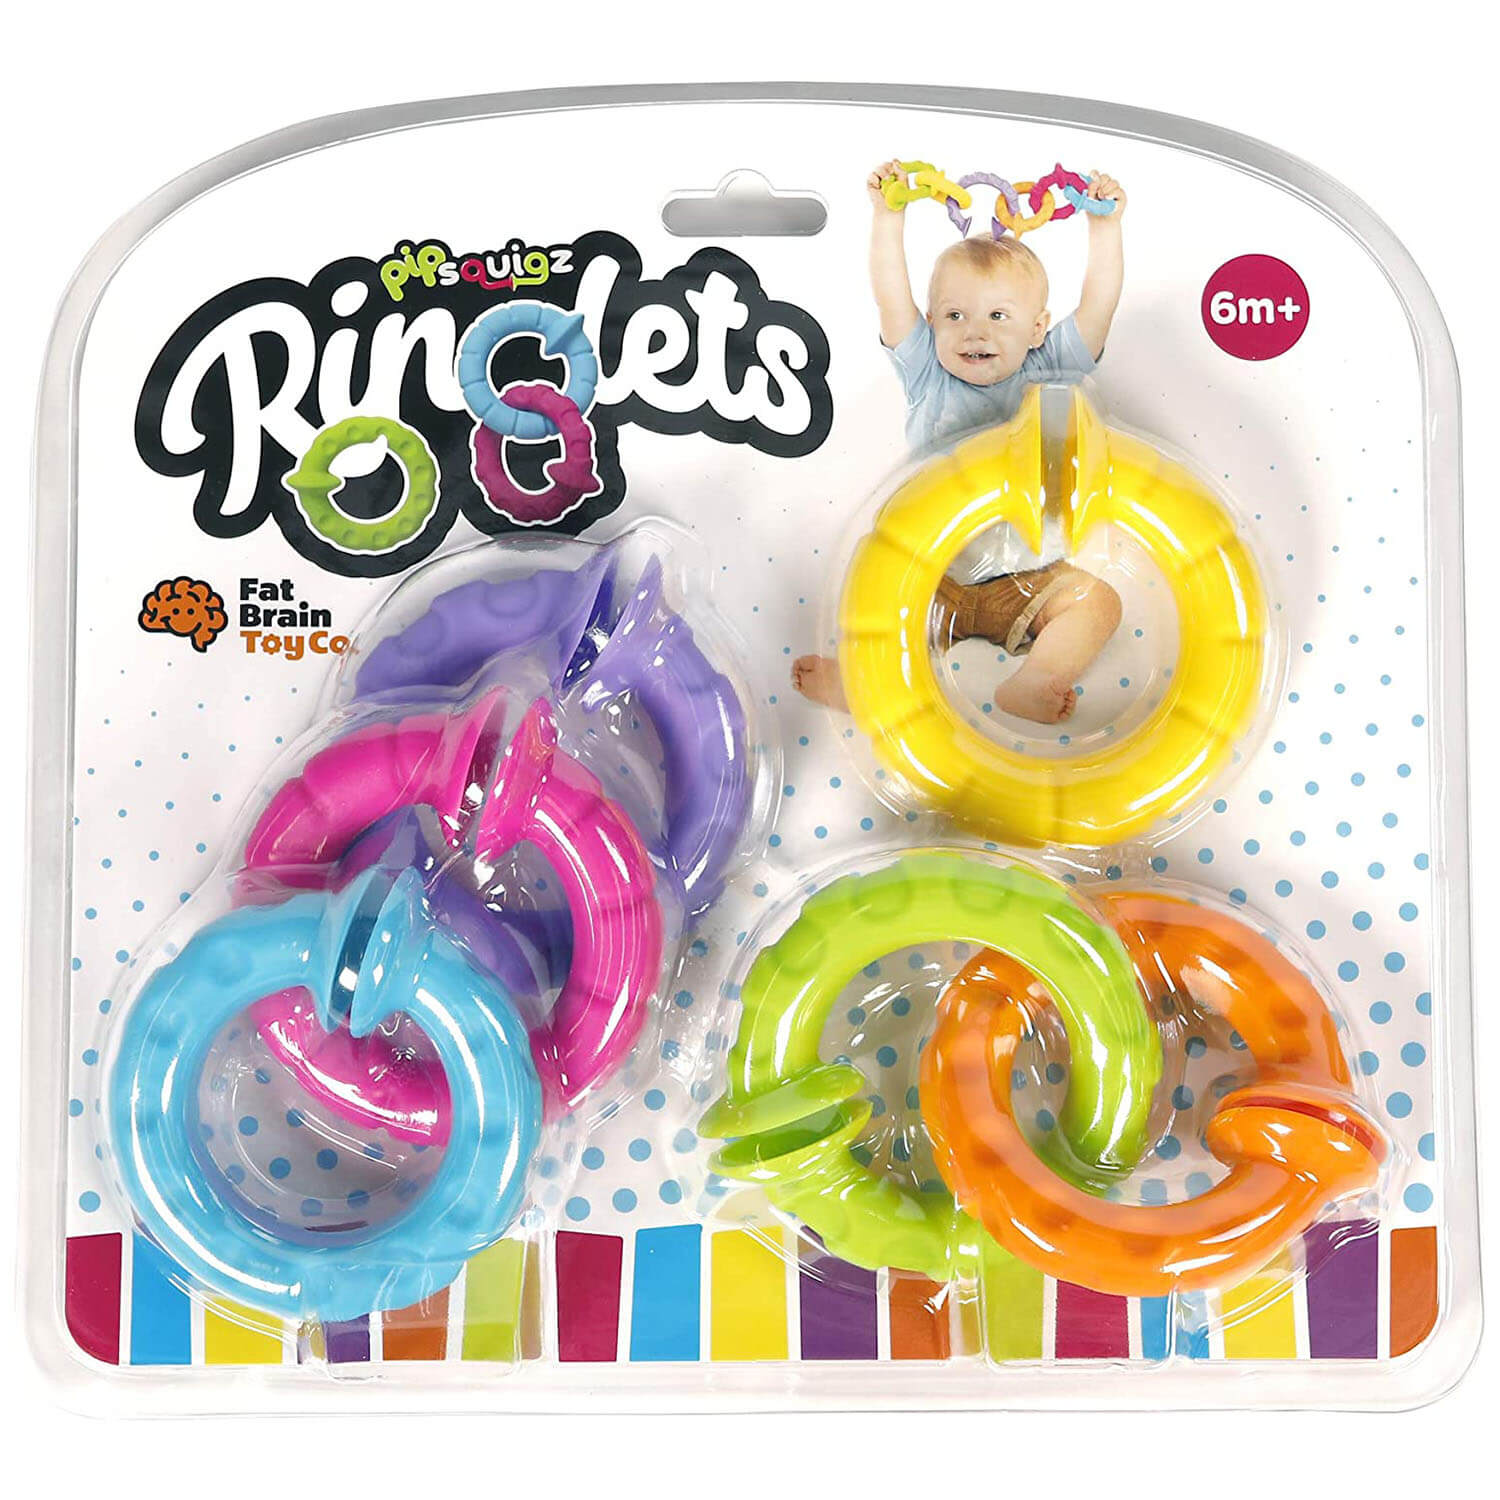 Front view of the Fat Brain Toys pipSquigz Ringlets package.